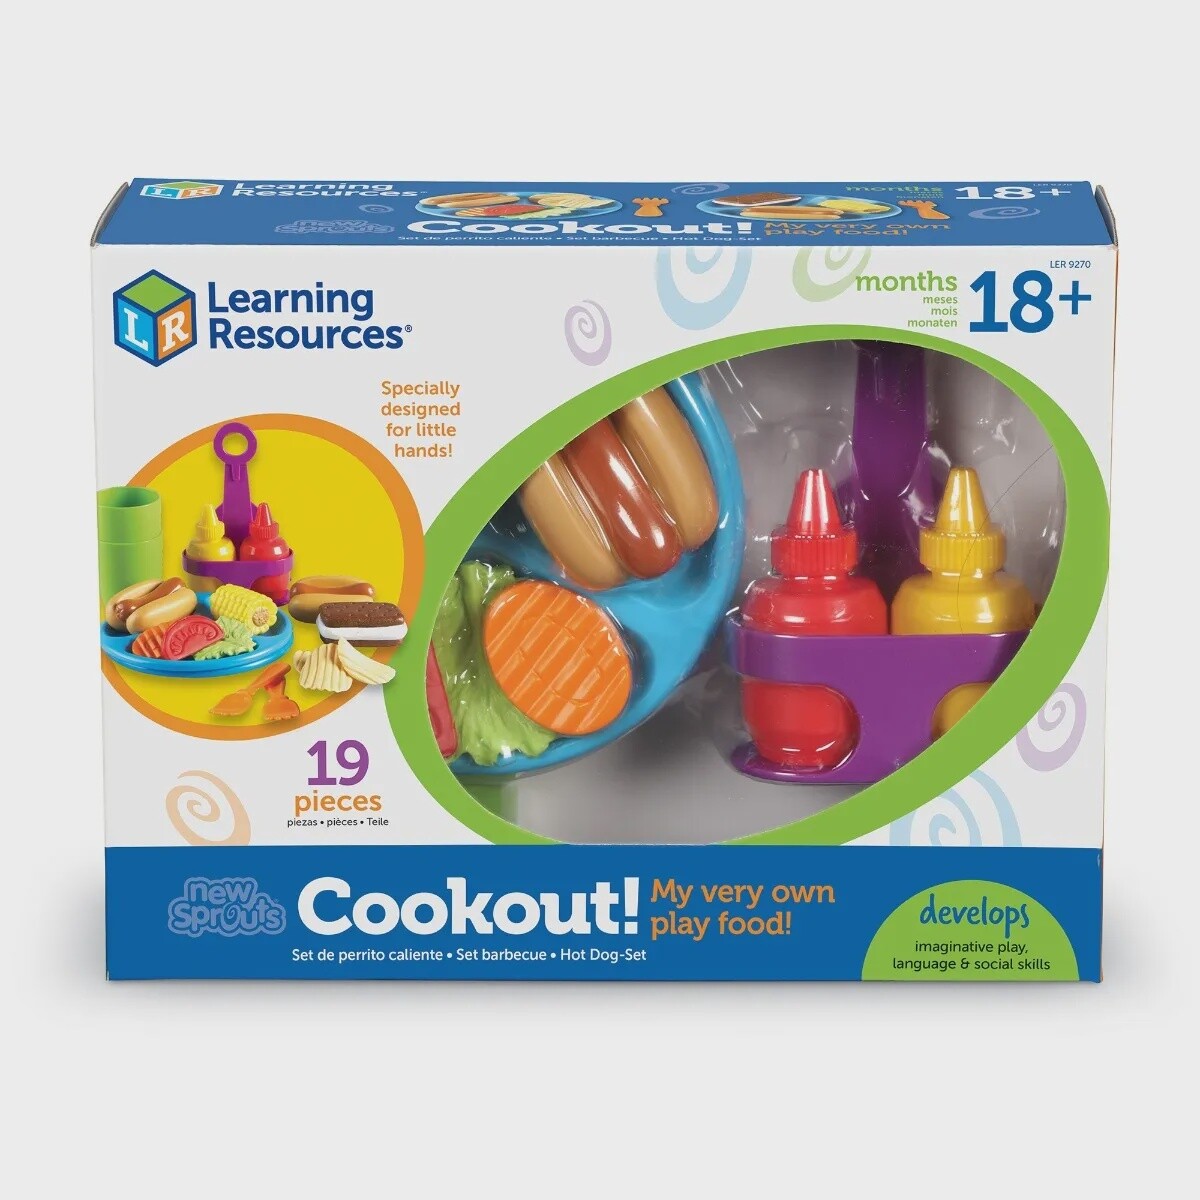 Learning Resources New Sprouts Cookout!